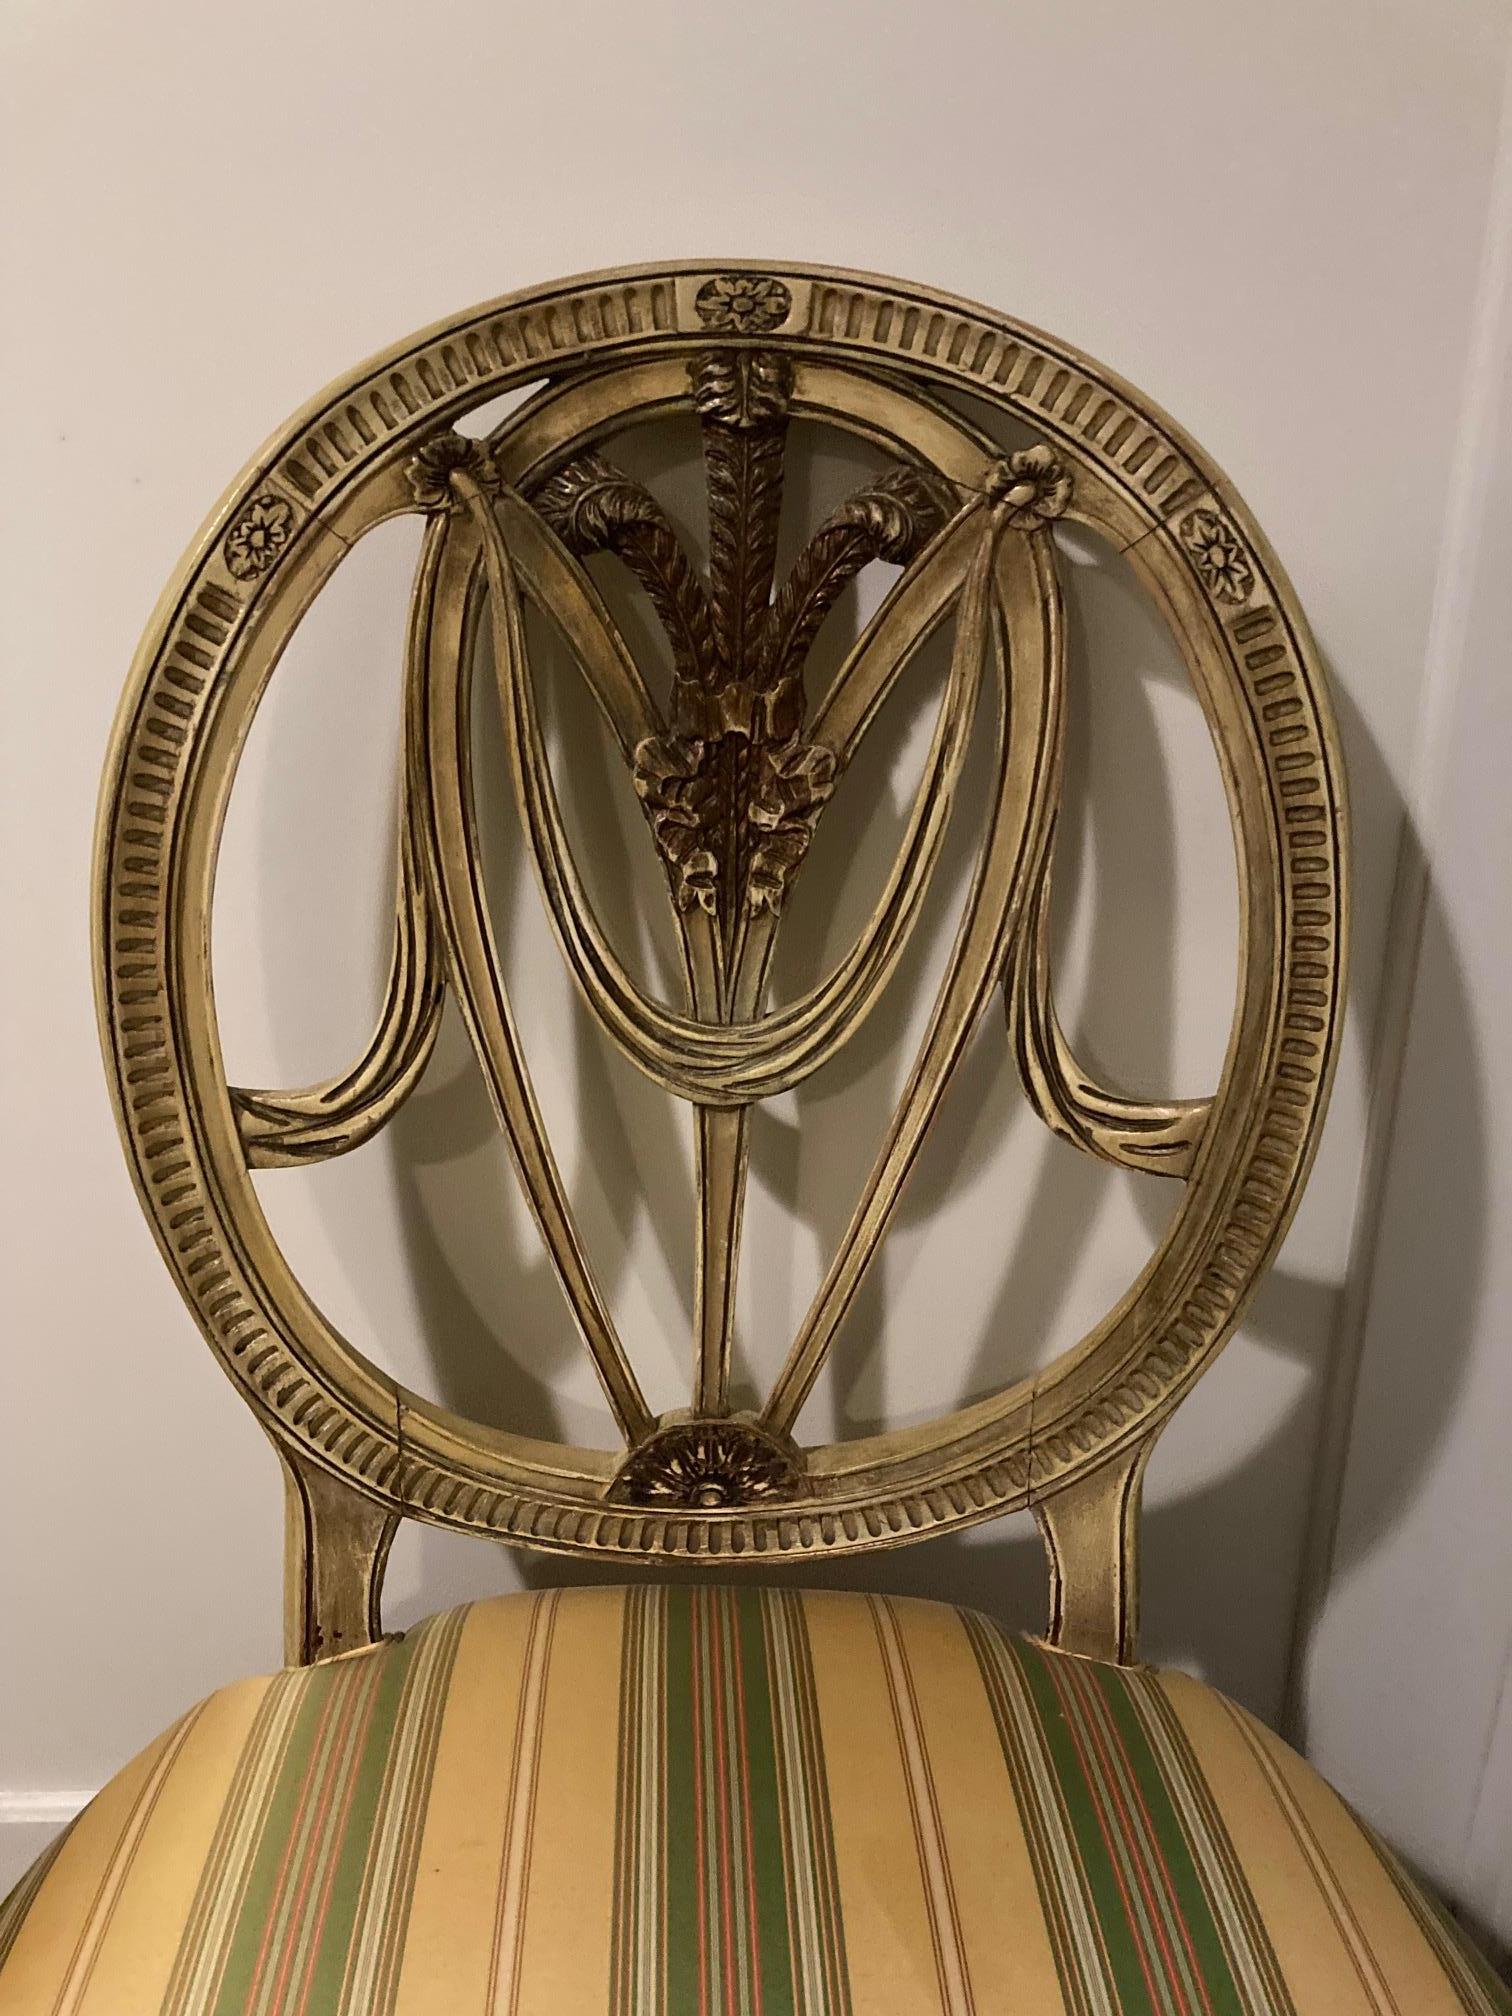 Set of 8 19th Century Italian Painted Dining Room Chairs In Good Condition For Sale In Tacoma, WA